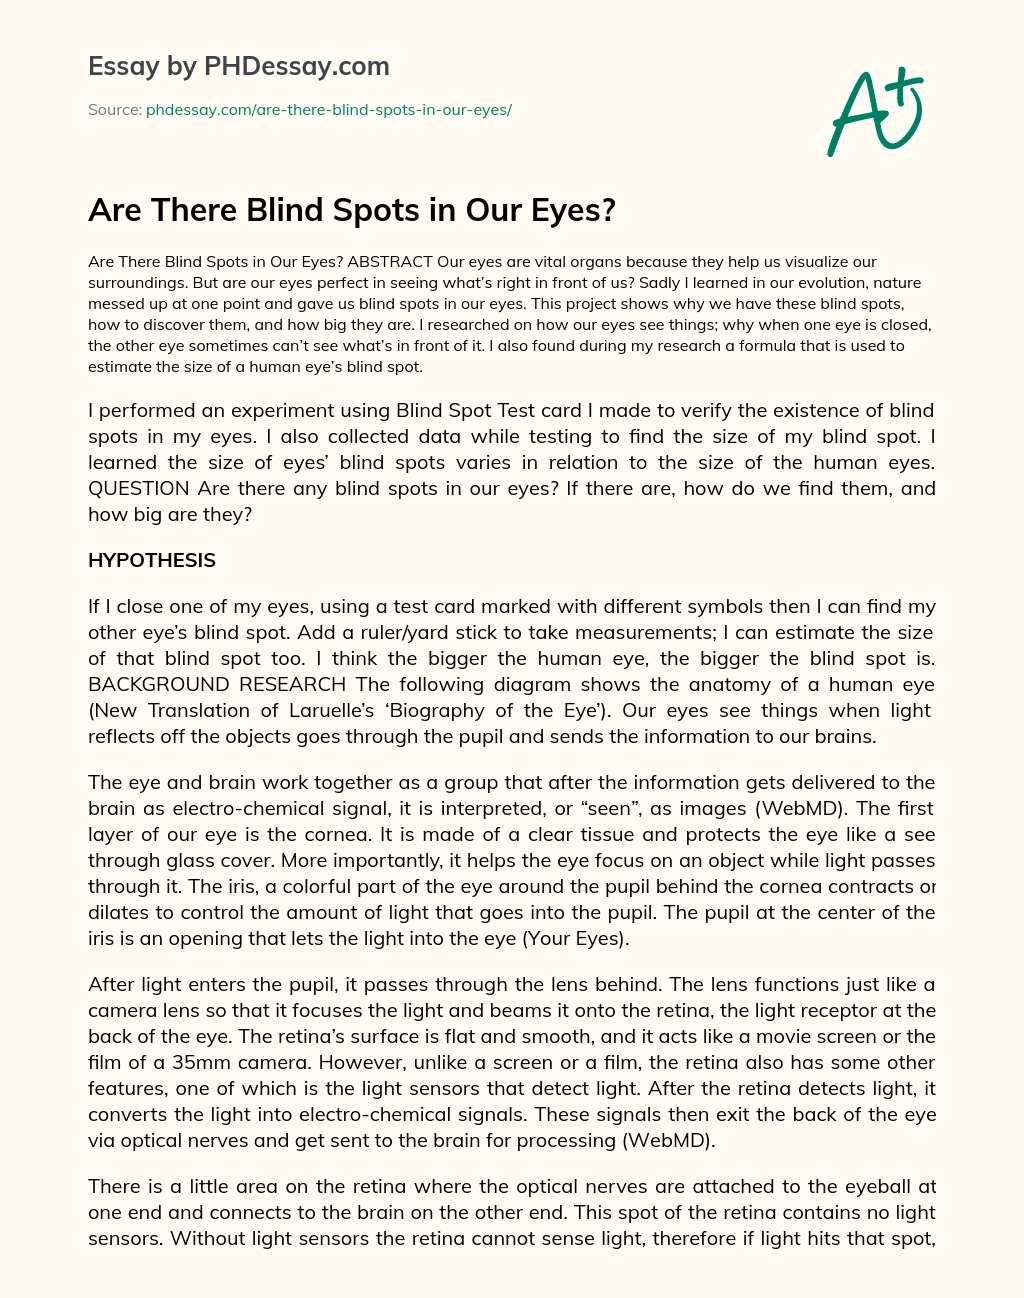 Are There Blind Spots in Our Eyes? essay